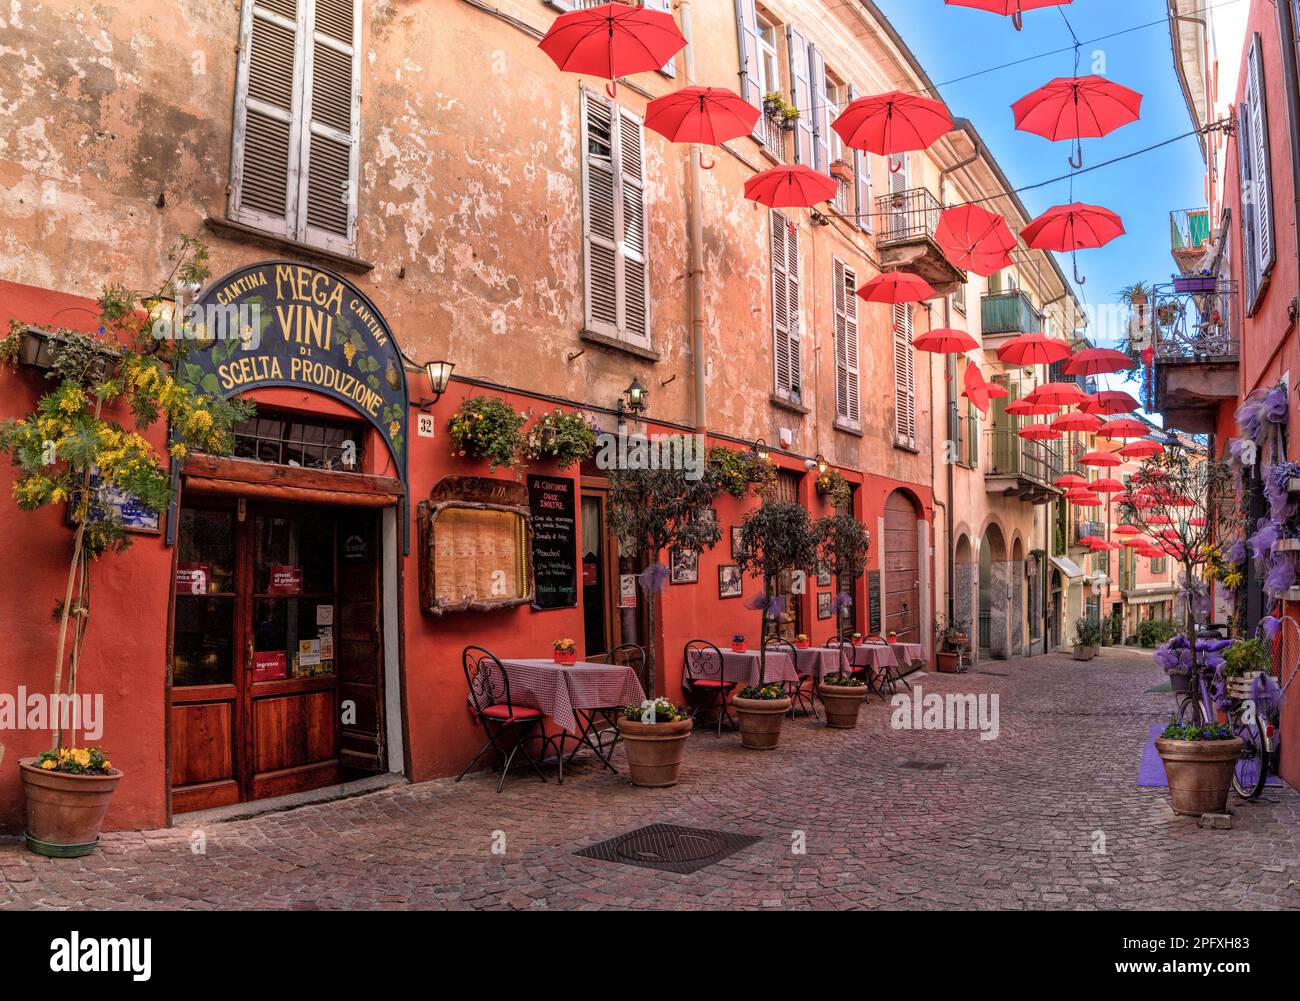 Luino, Italy - 16 March, 2023: cobblestone street with small shops and colorful decorations in the old city center of Luino Stock Photo